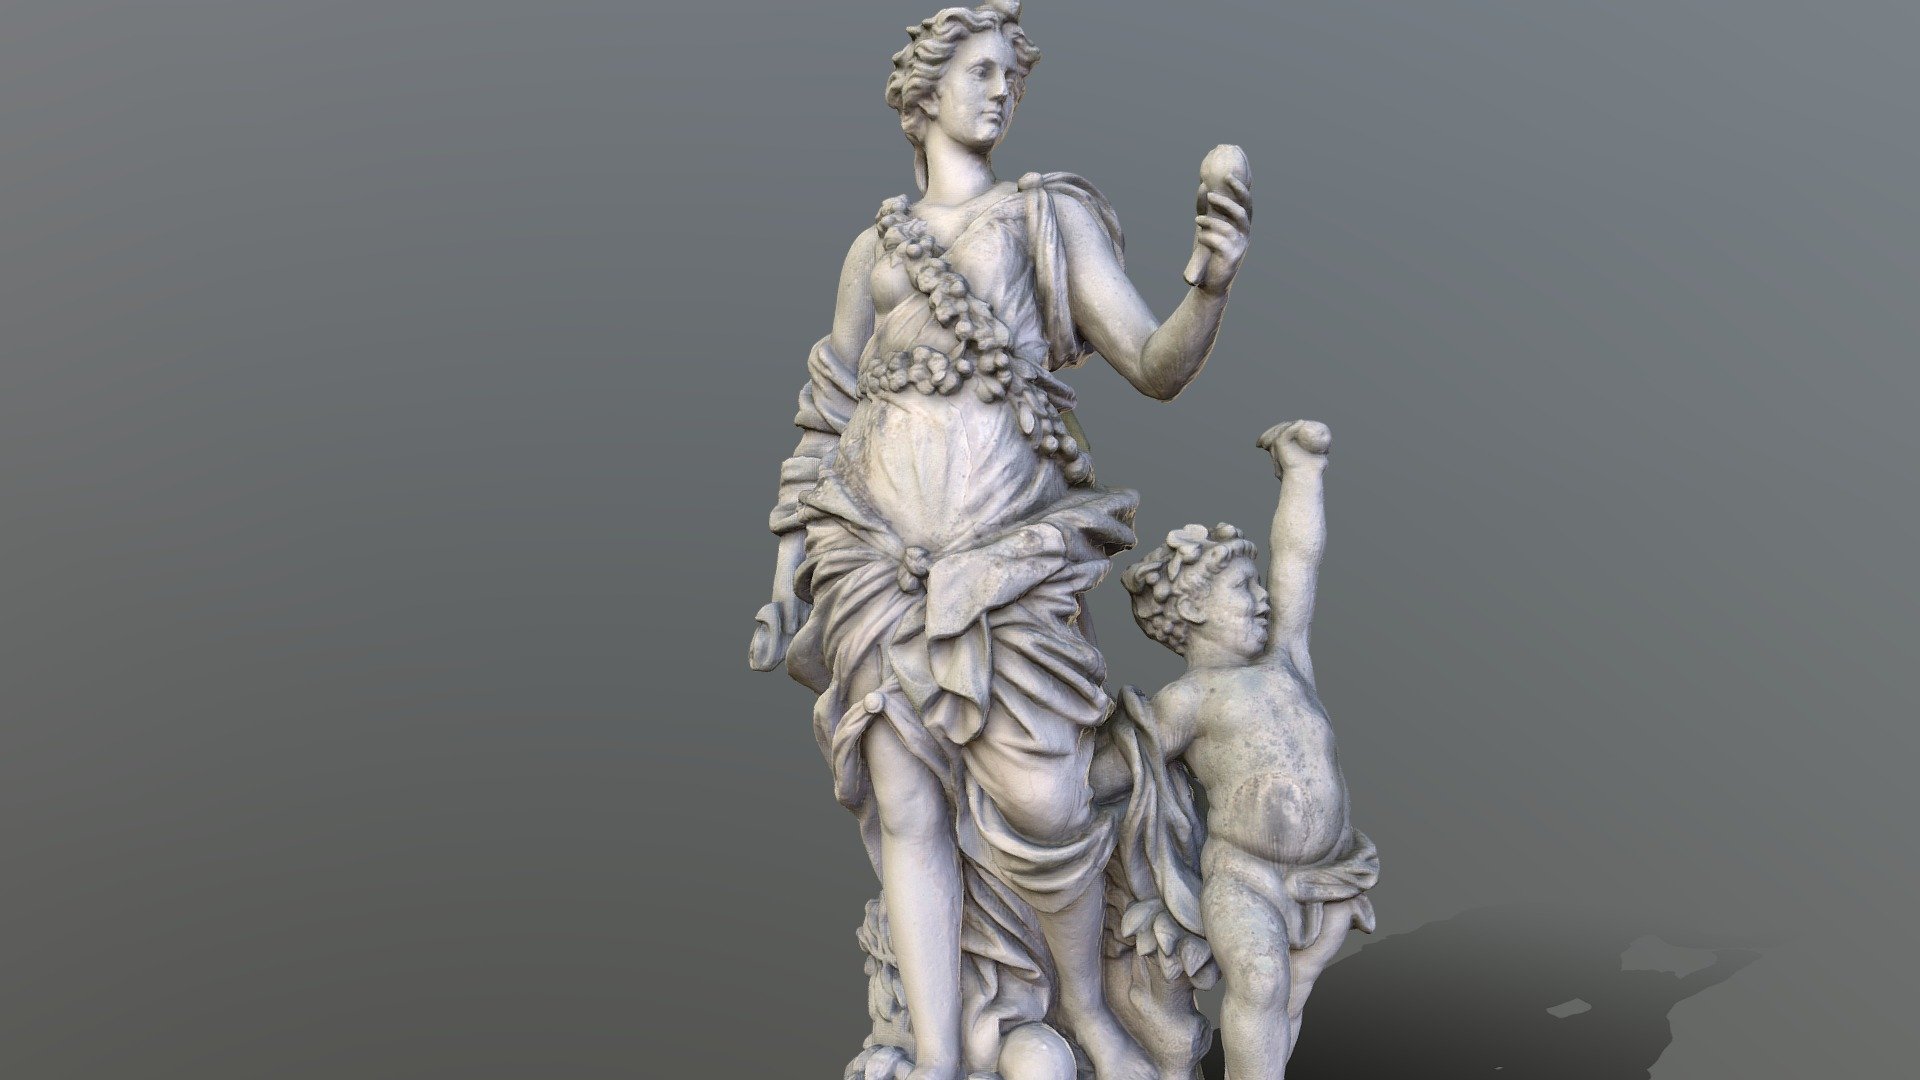 A lush female figure, clad in an antique robe in the baroque sense, stands on a rectangular plinth on a rectangular, multi-part base. The right breast is uncovered. The robe is knotted at the front below the hips. The left free leg is set back. The goddess wears flower threads as a belt and as a ribbon running across the chest.

Source: https://bildhauerei-in-berlin.de/bildwerk/flora-mit-putto/



413 Pics, Shot with GoPro 9 &amp; DJI Mini 2 - Goddess Pomona Statue Berlin - 3D model by visualmotions 3d model